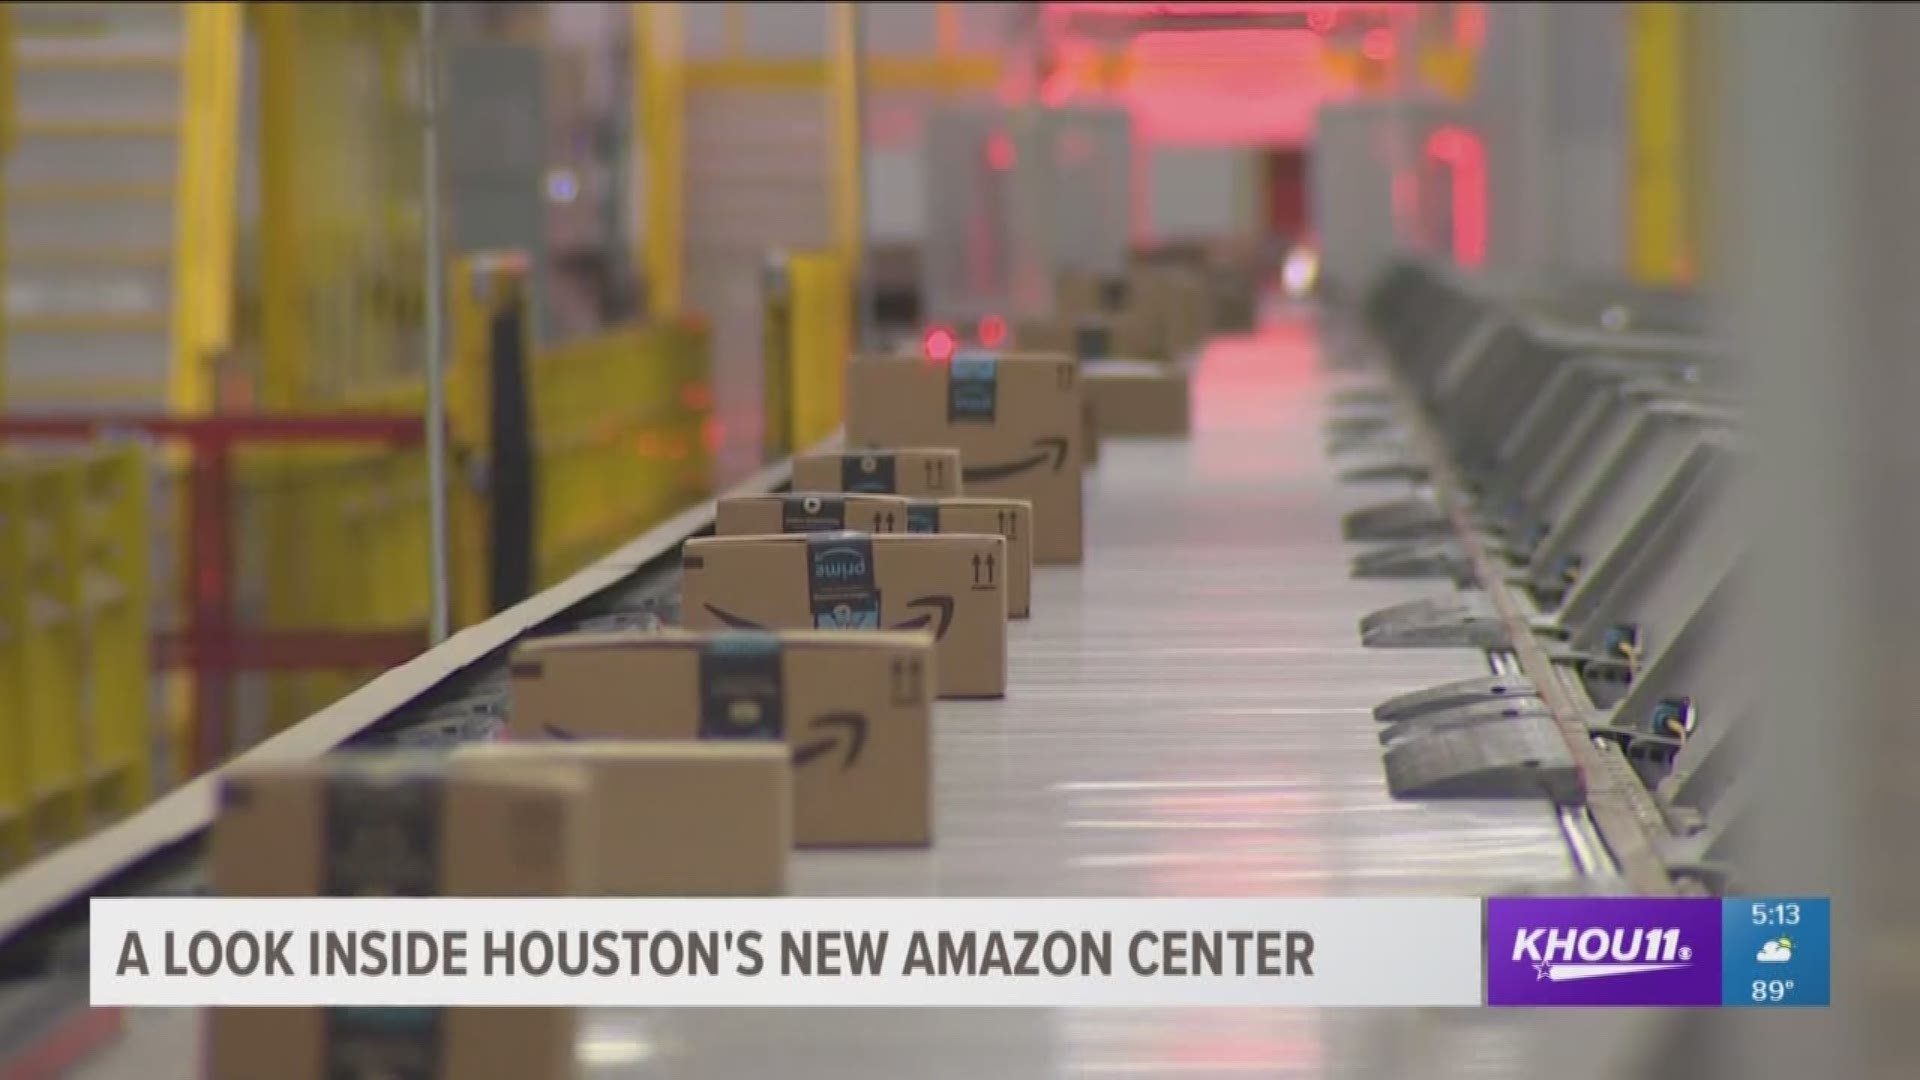 Online retail giant Amazon opened the doors to its Houston fulfillment center Friday.